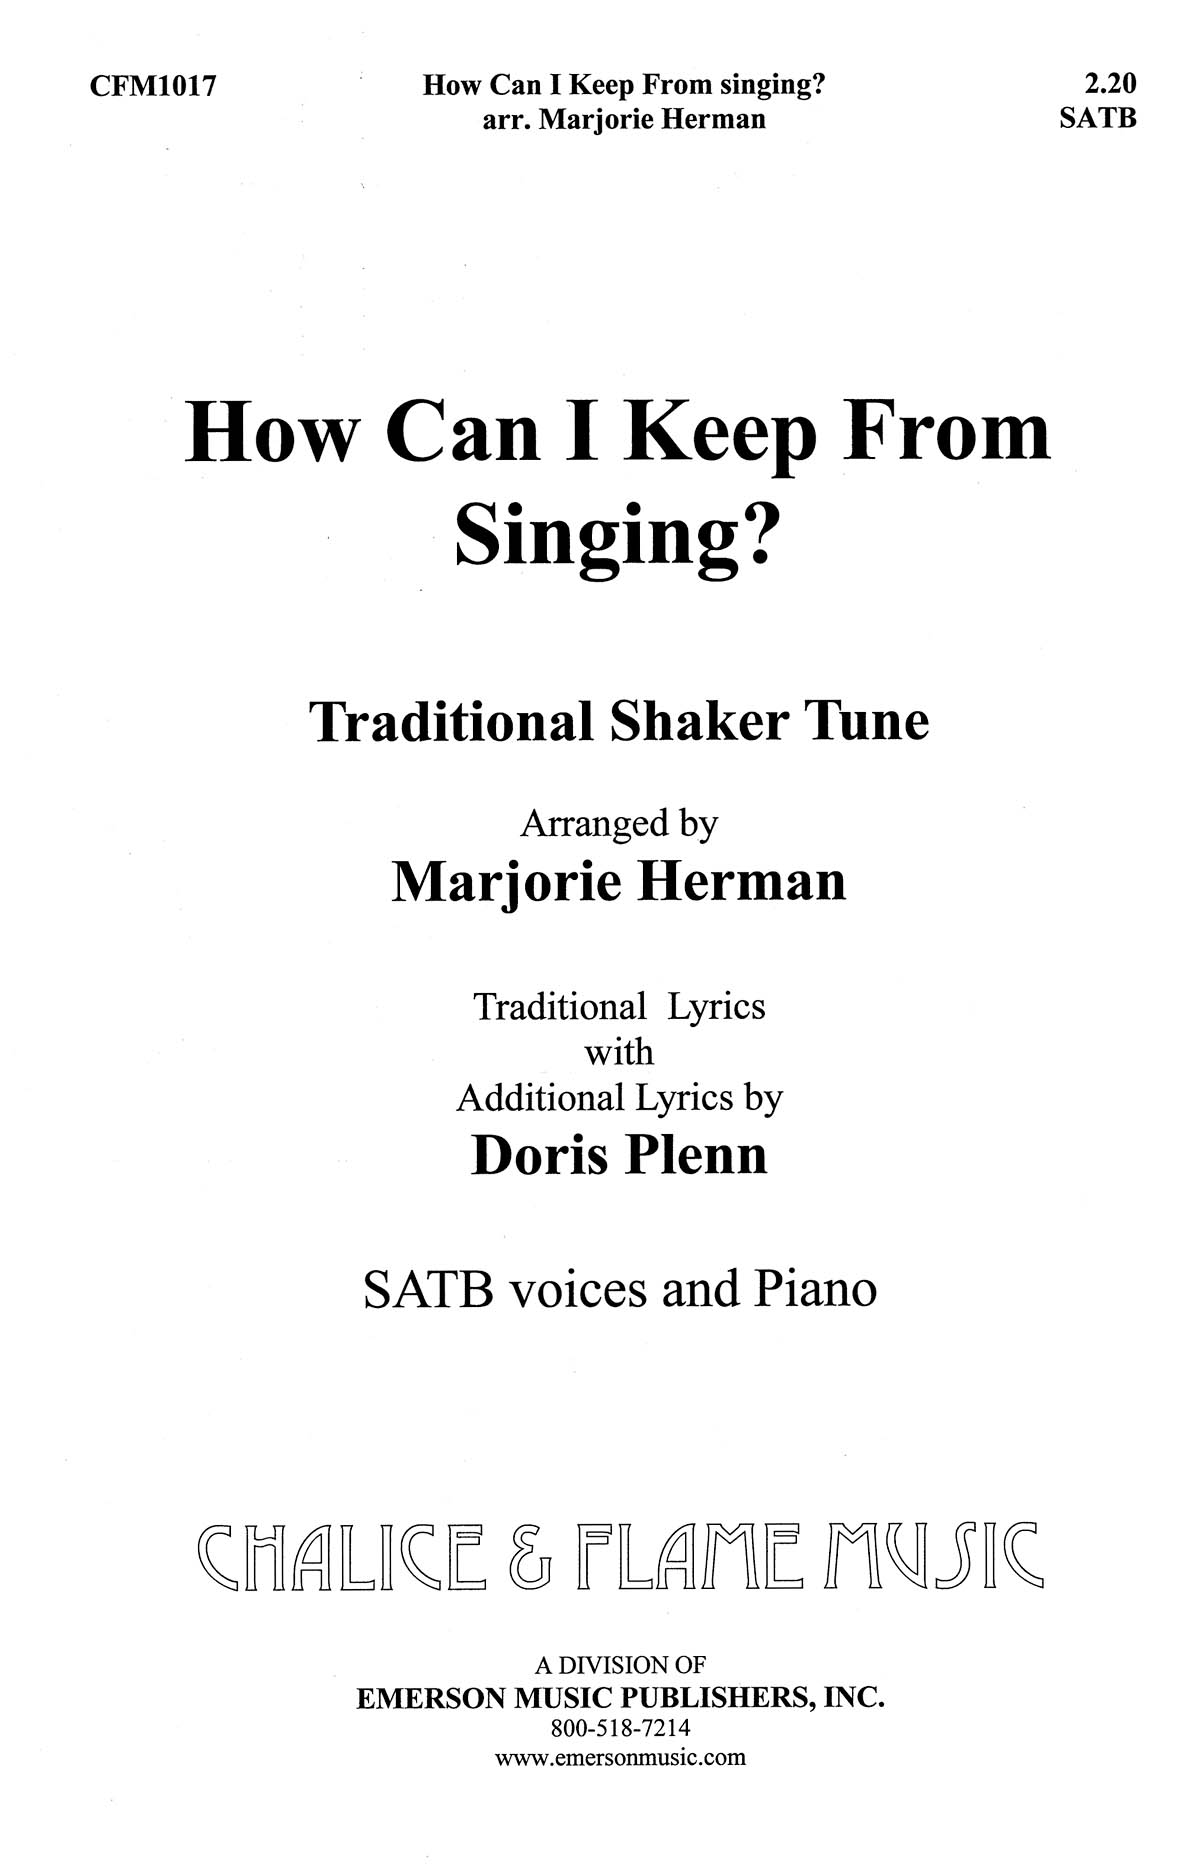 Marjorie Herman: How Can I Keep From Singing: SATB: Vocal Score